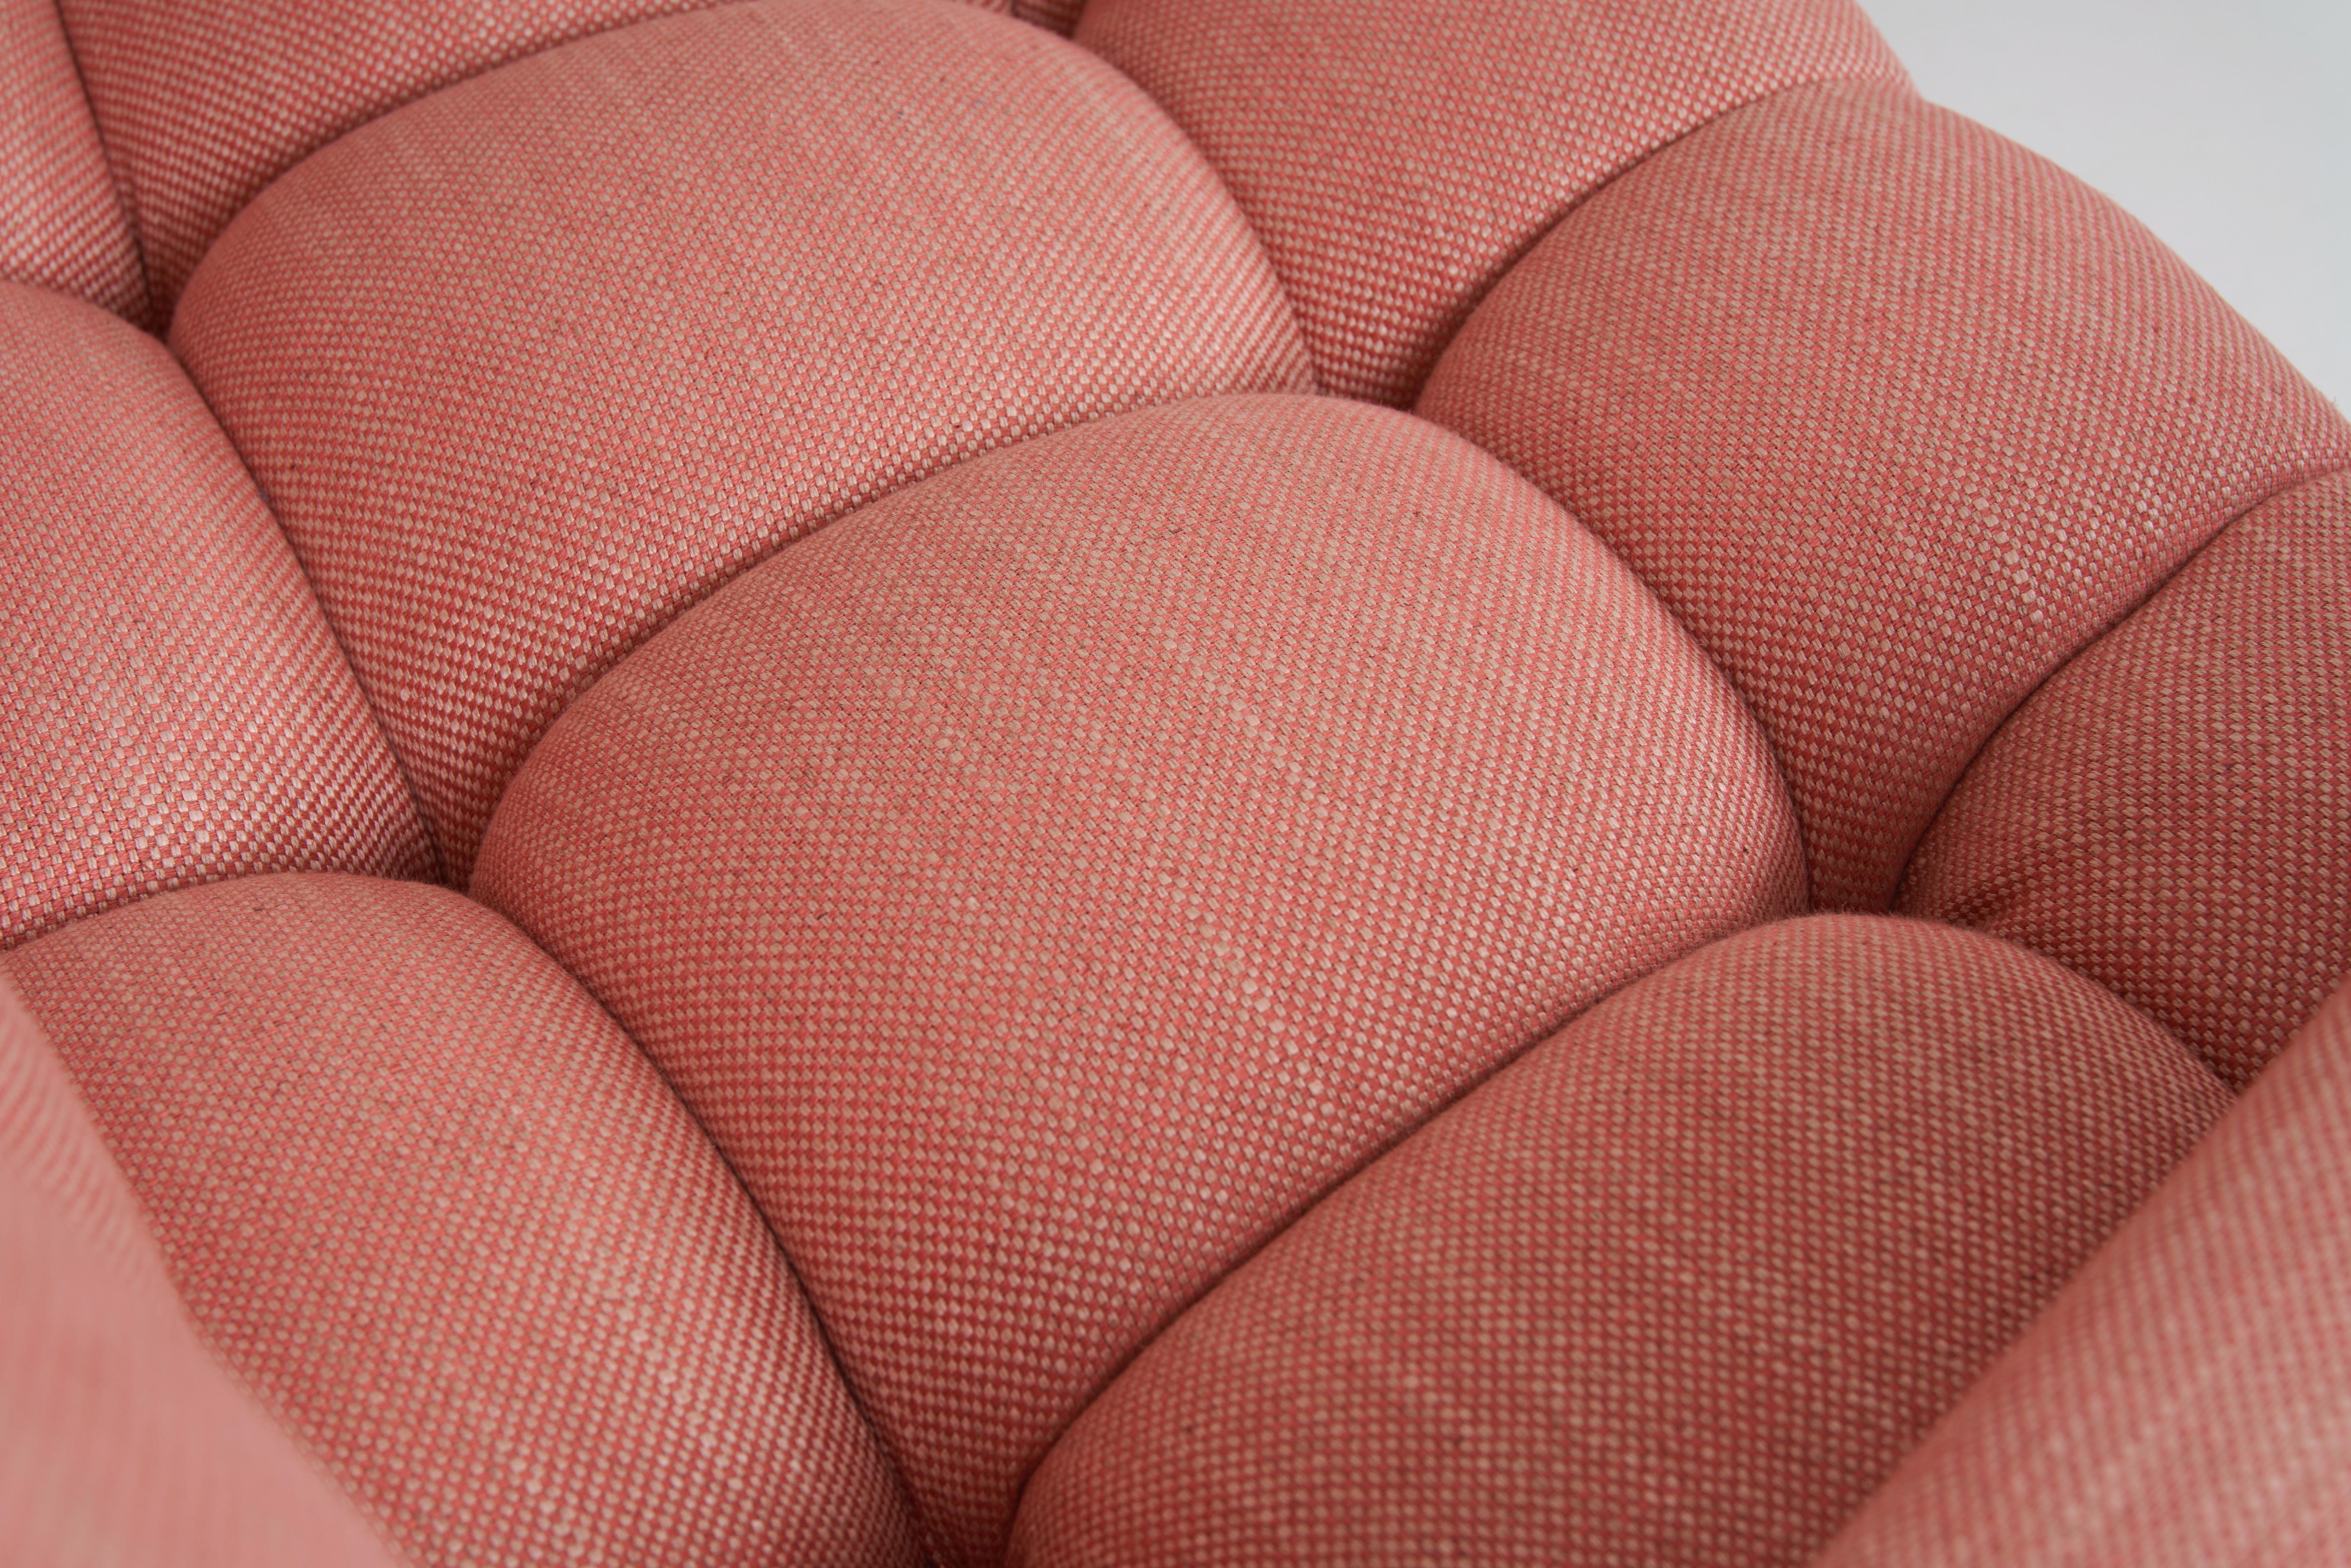 Mid-20th Century Biscuit Tufted, Guava Colored, Curved Three Piece Sectional by William Haines